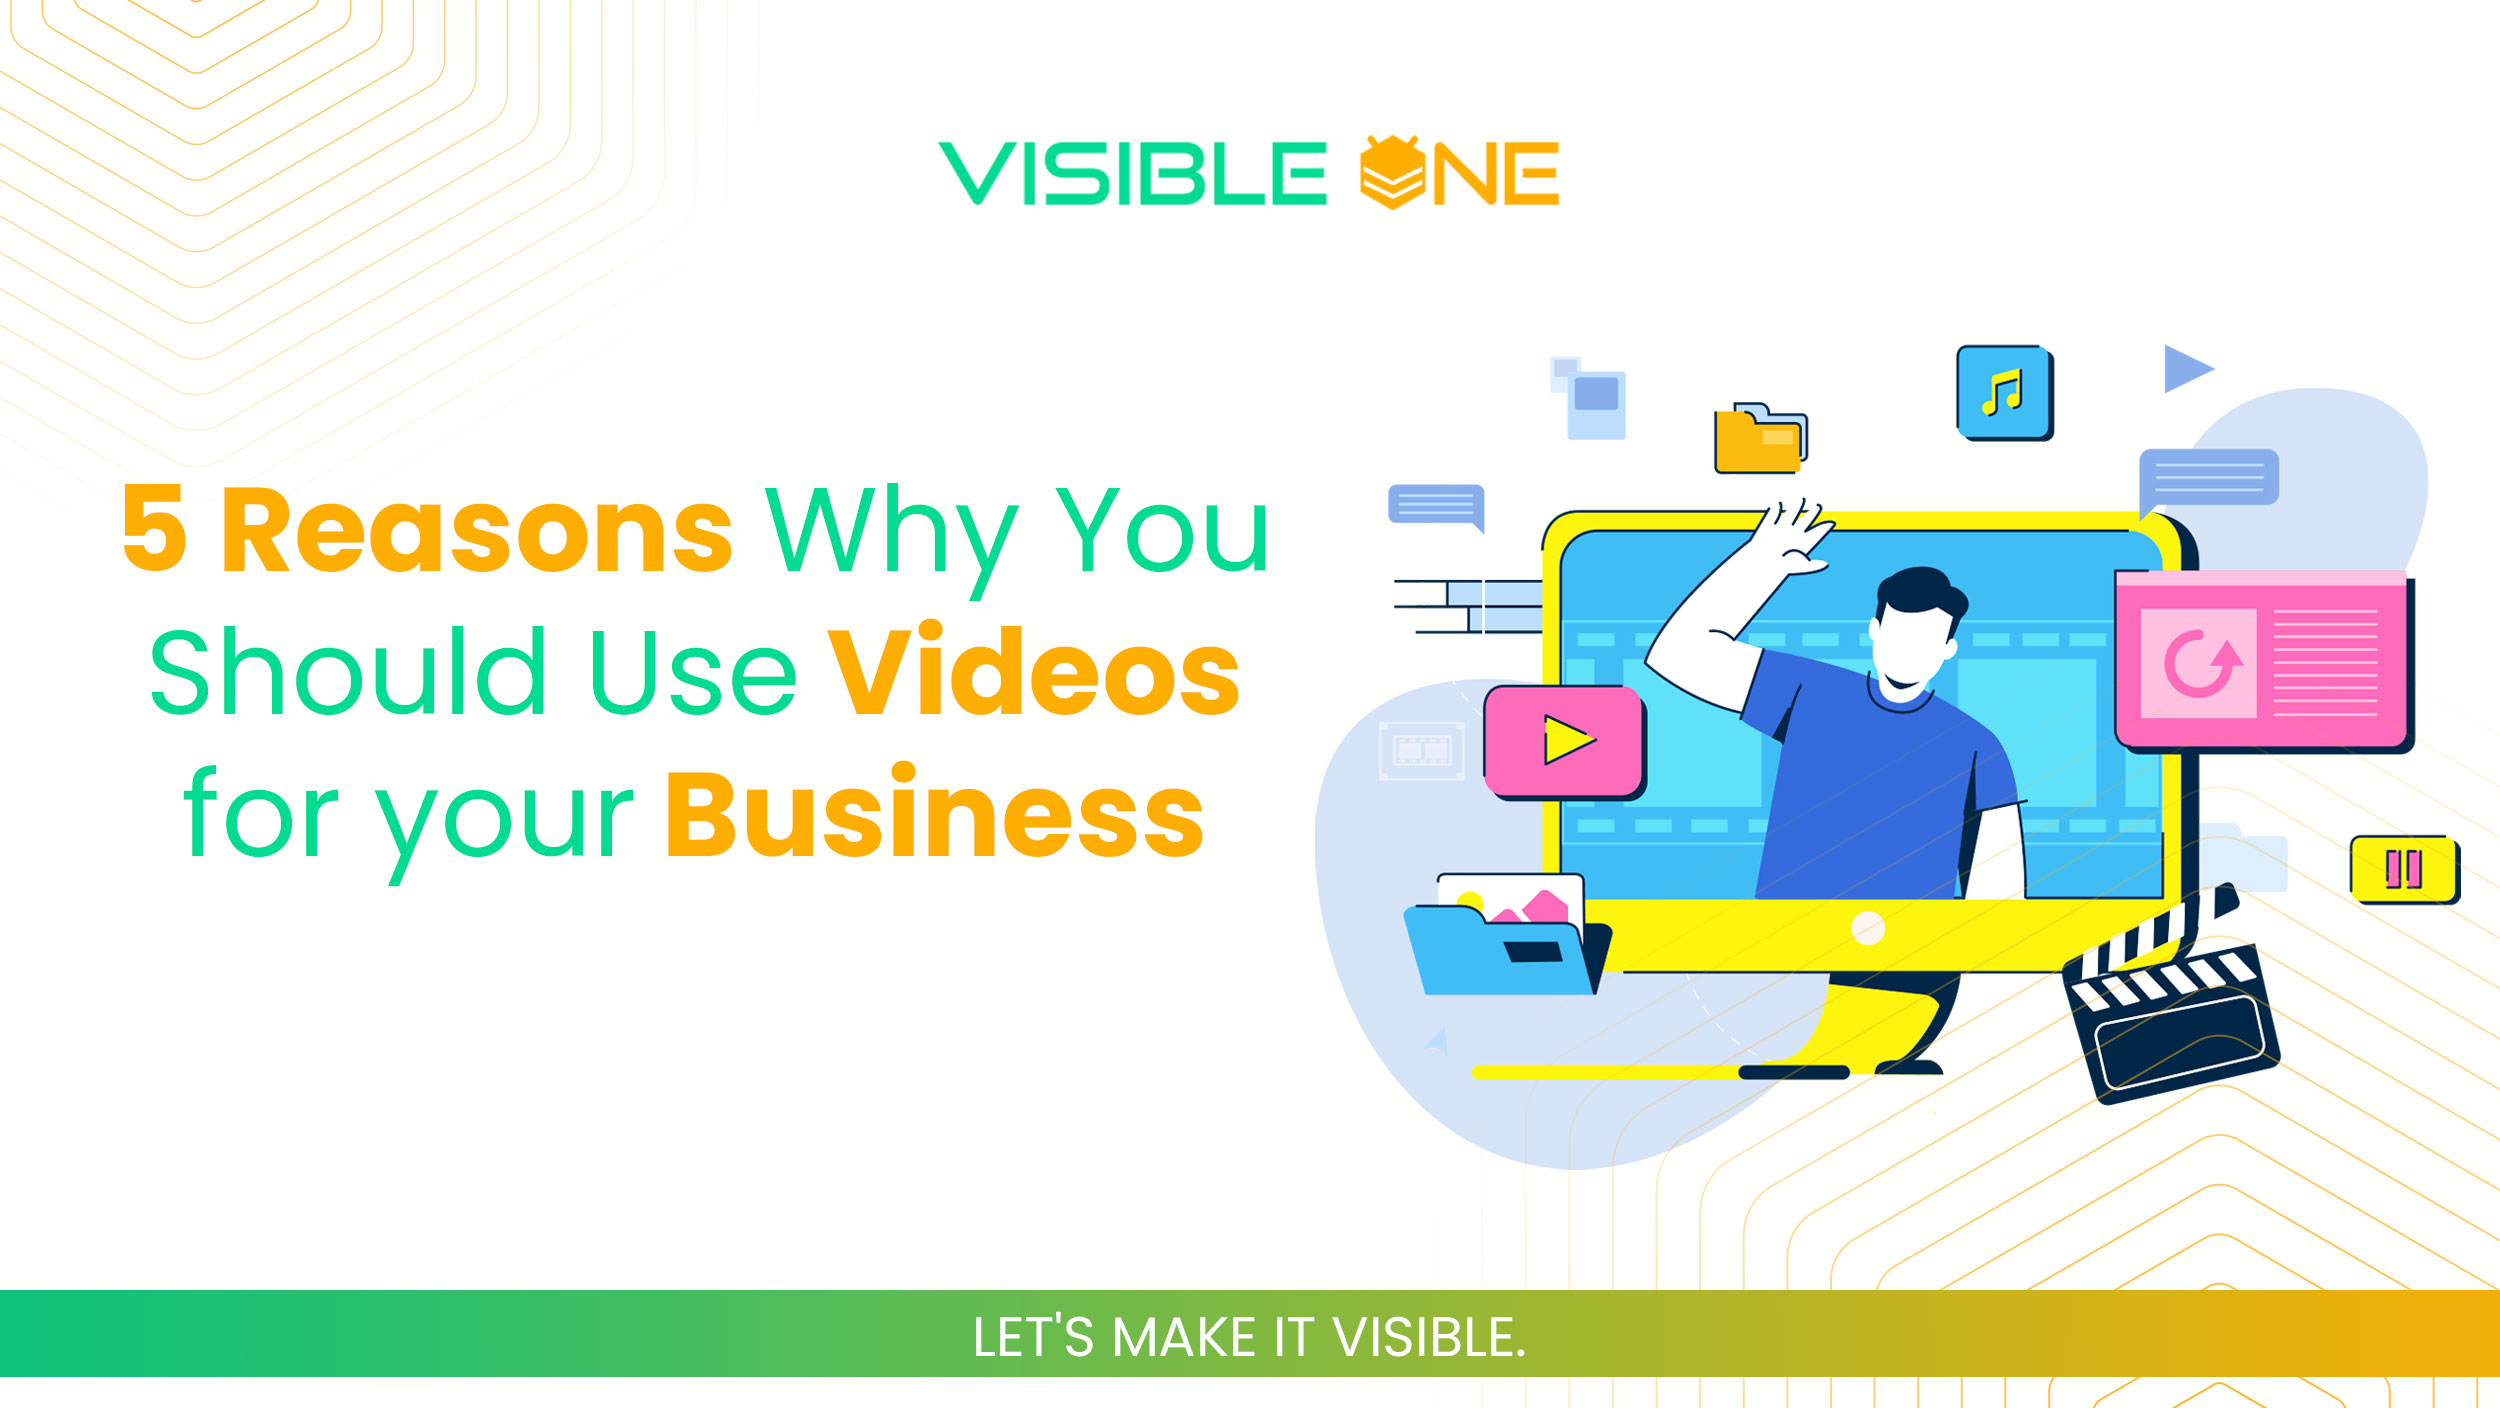 5 Reasons Why You Should Use Videos for your Business